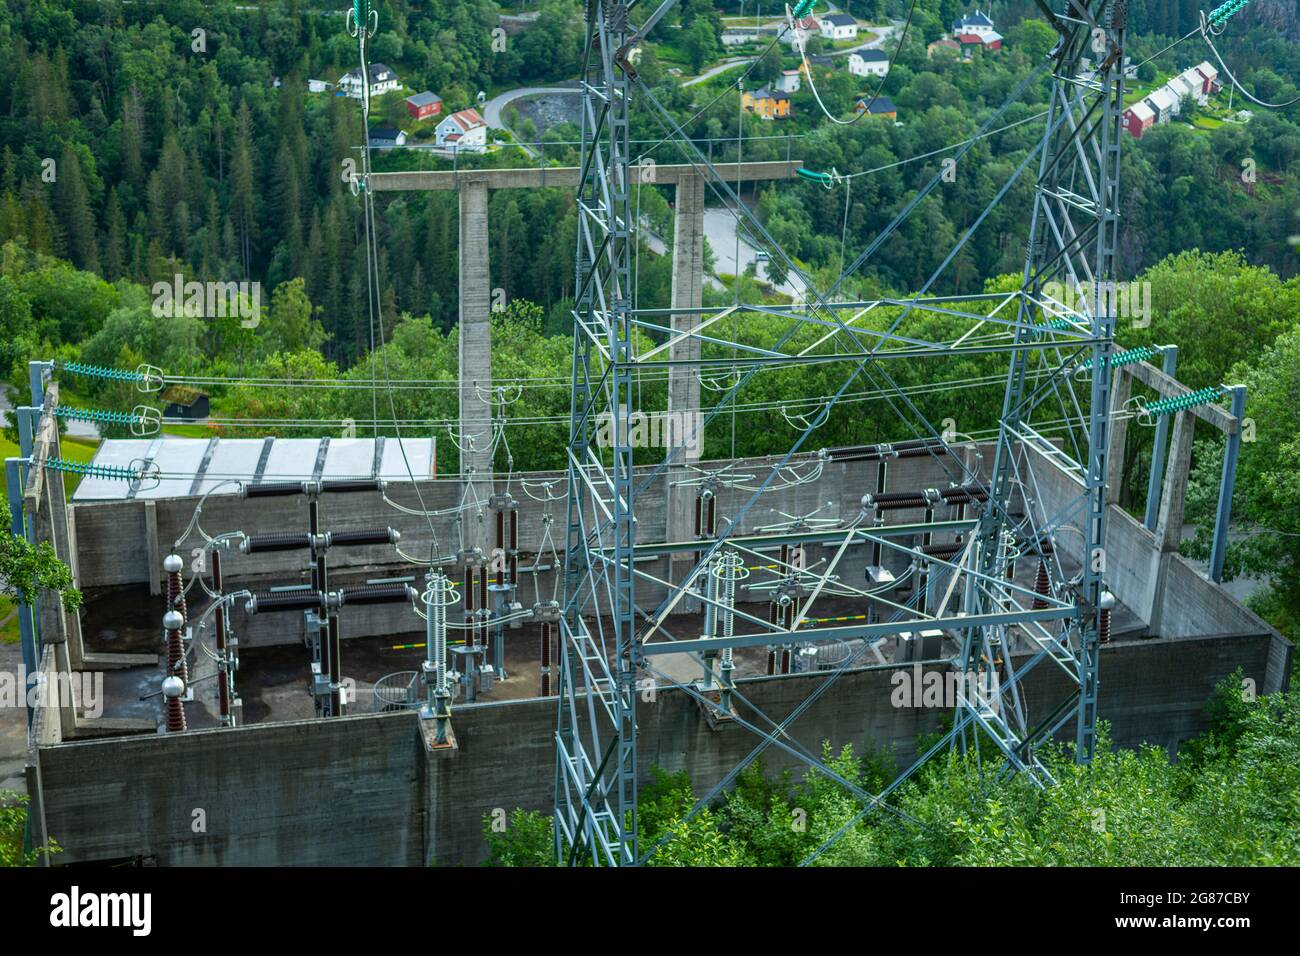 on the  trail of the past at the Vemork power plant in norway Stock Photo